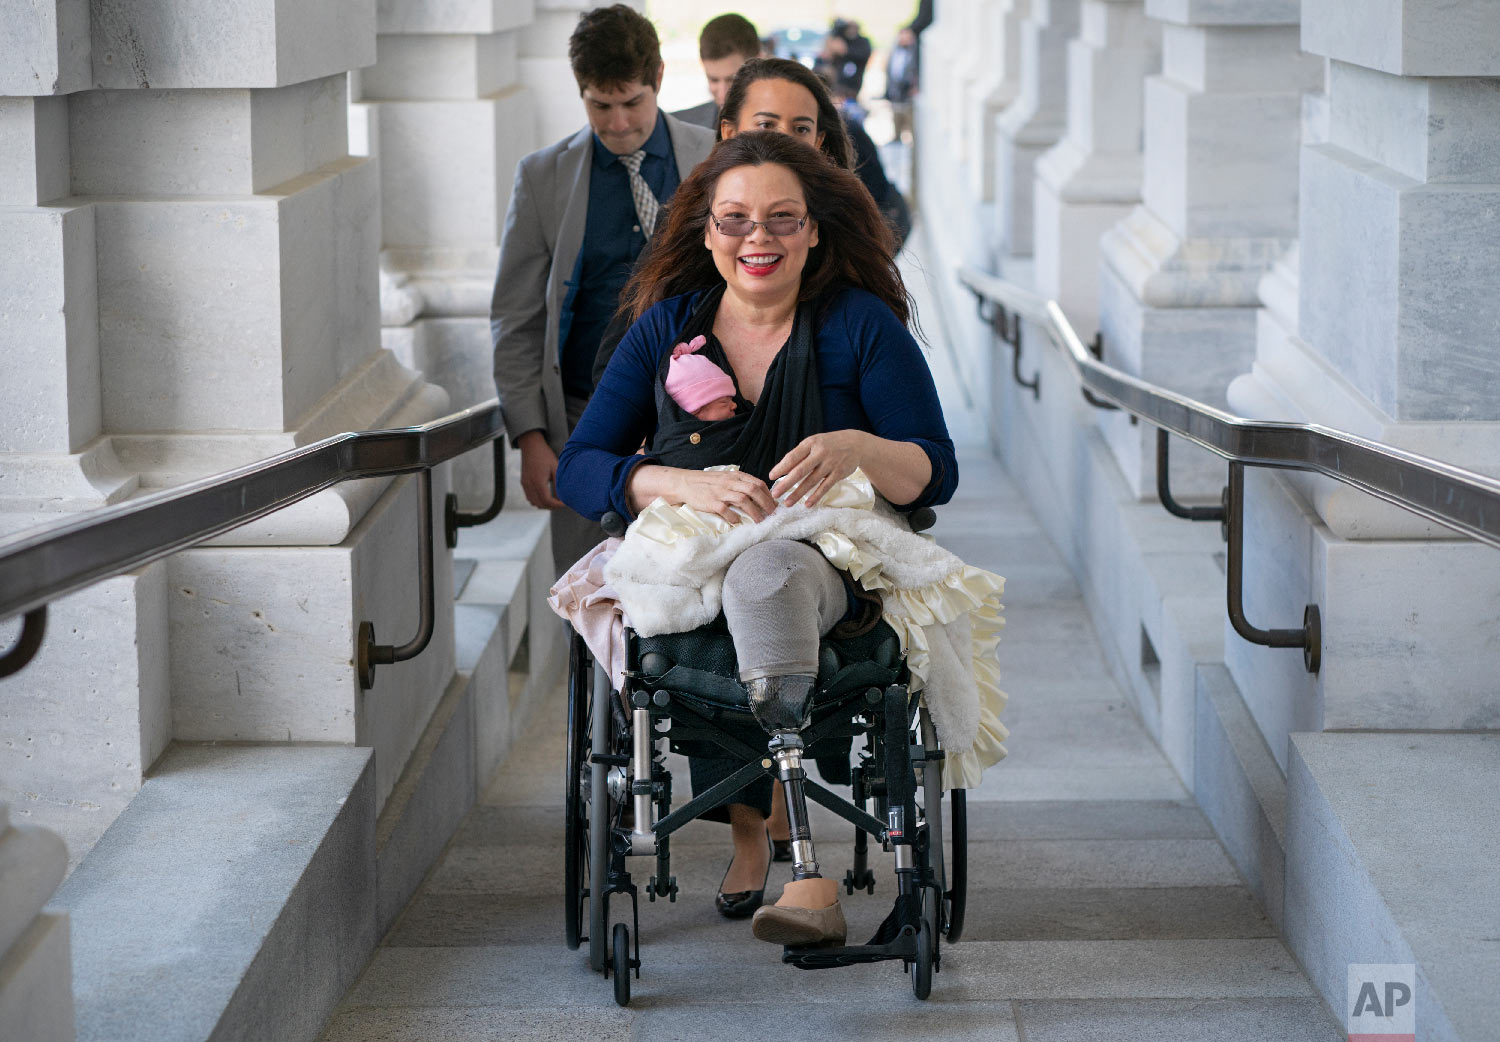  Sen. Tammy Duckworth, D-Ill., arrives at the Capitol for a close vote with her new daughter, Maile, bundled against the wind, in Washington on April 19, 2018. In an historic change in Senate rules, the lawmakers decided to allow babies of members on